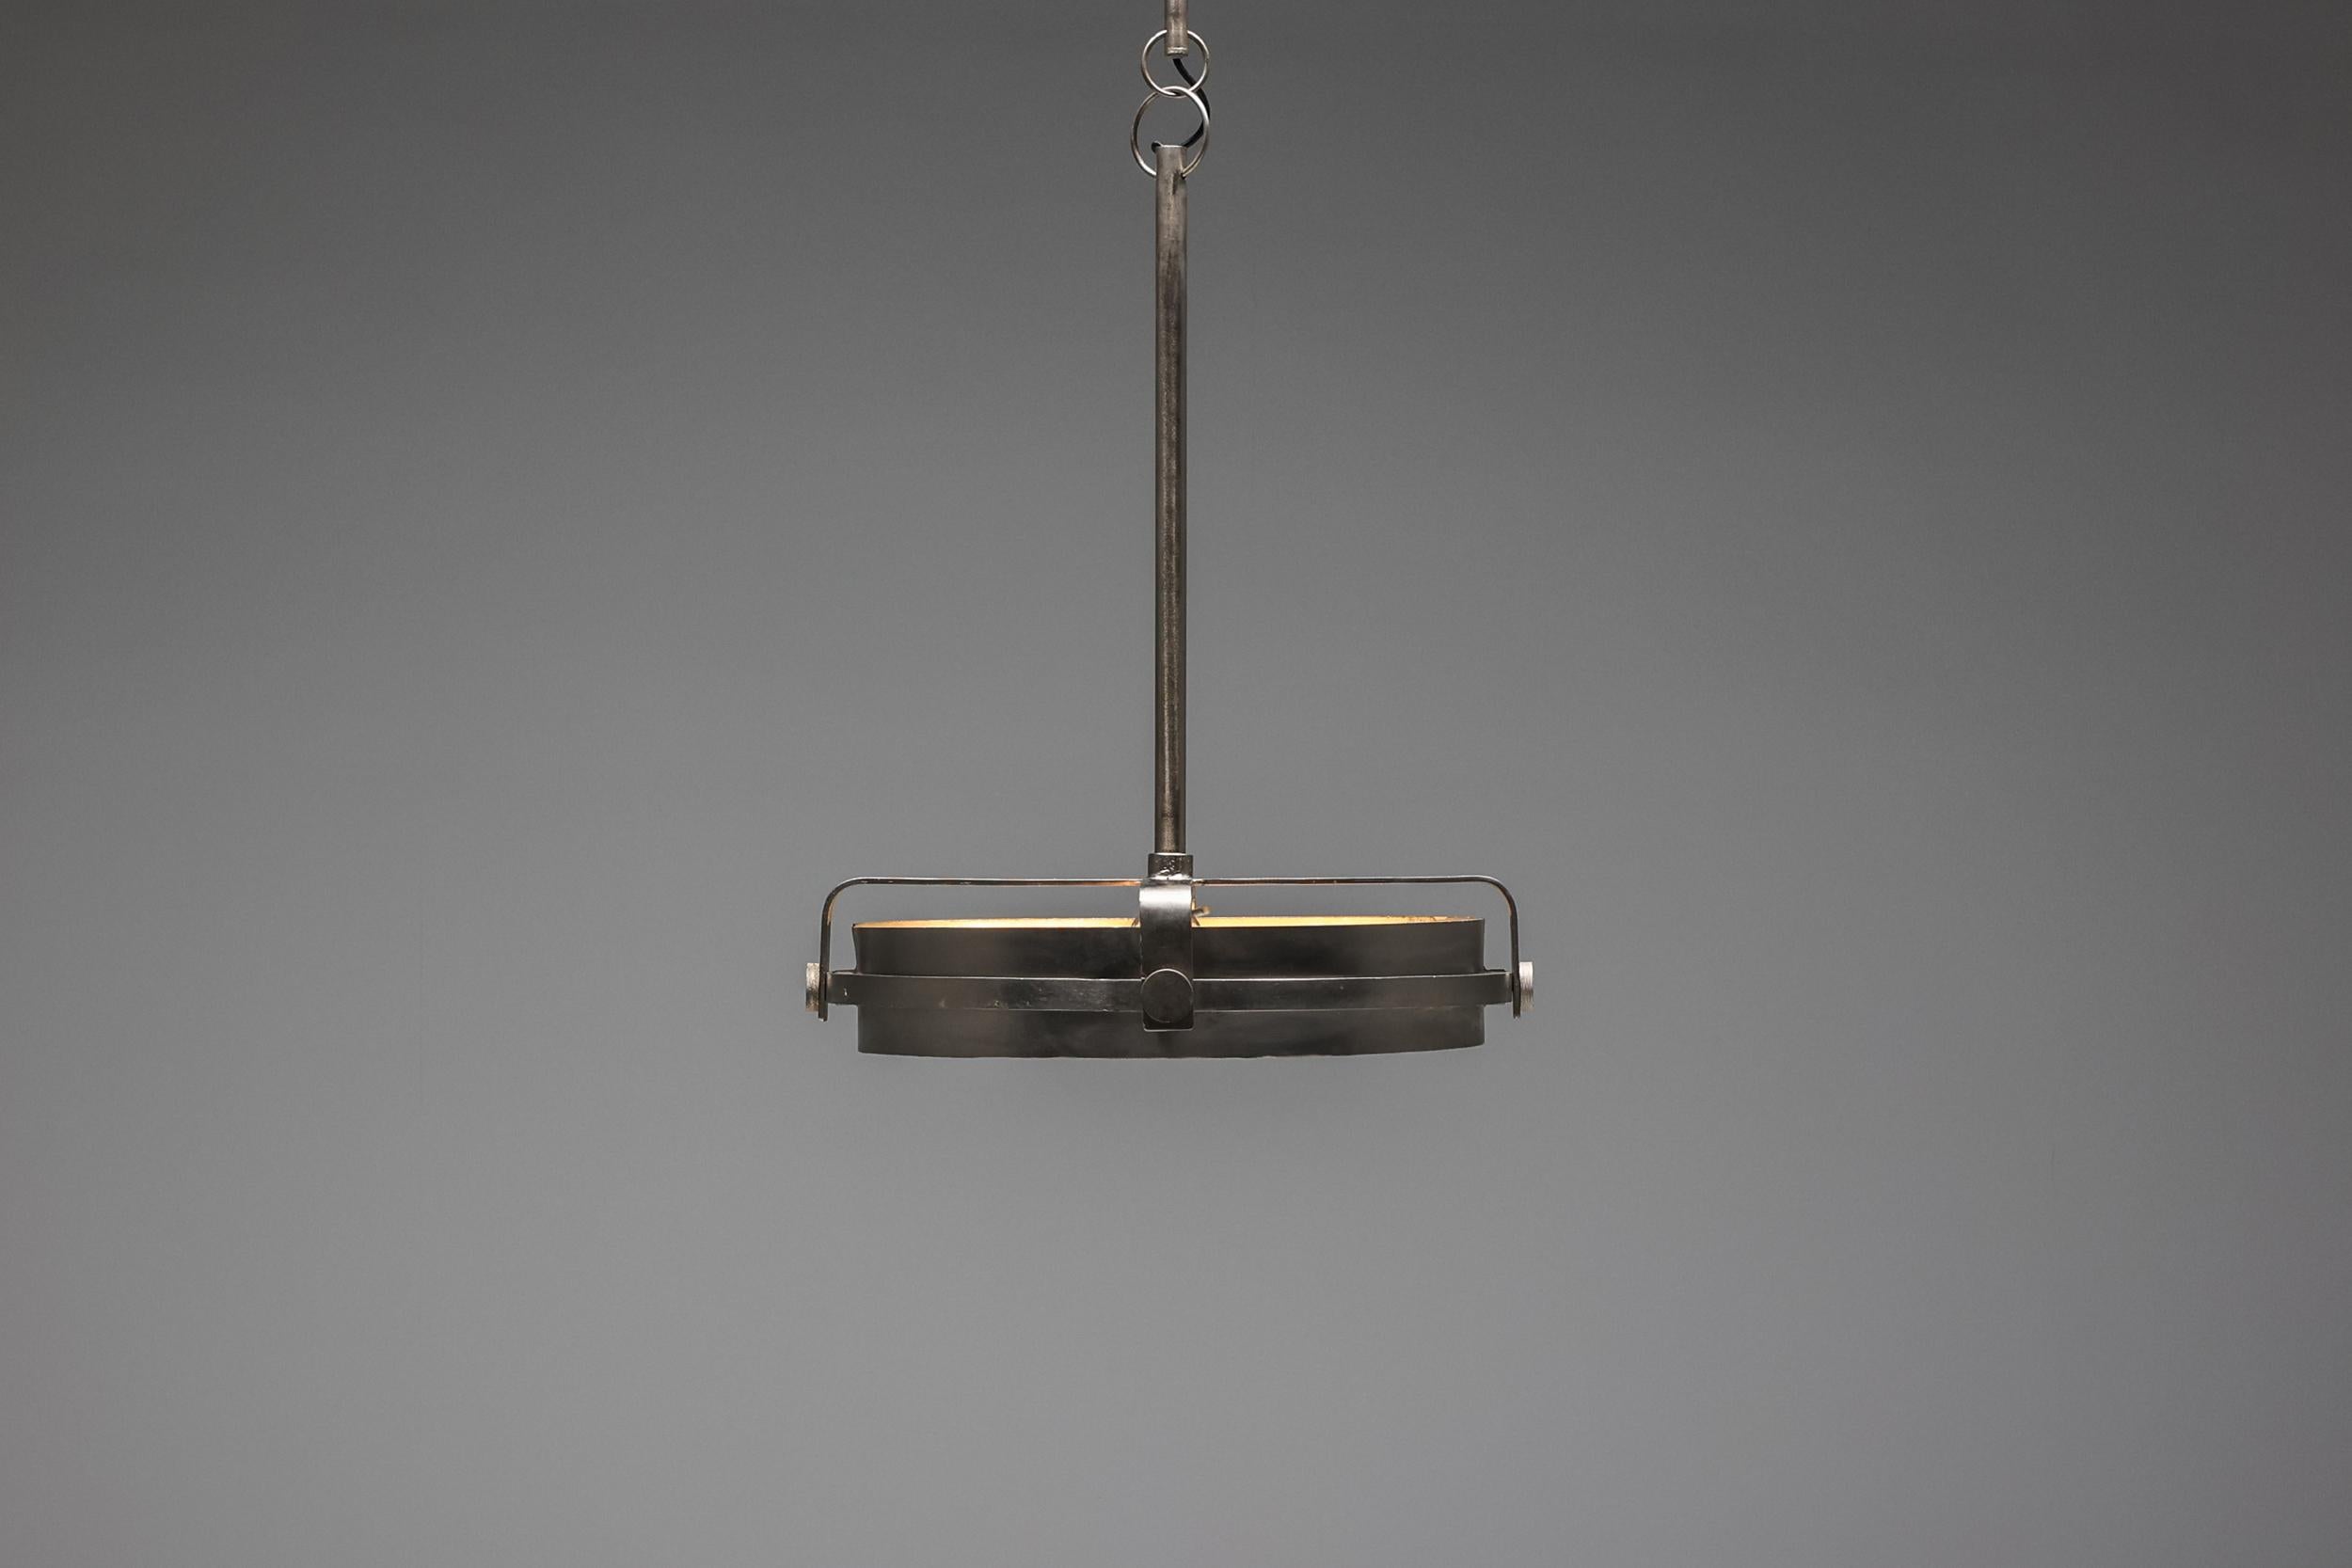 French design, Industrial, Post-modern, chandelier, pendant, 1990's.

Industrial steel ceiling lamp made in the 1990s in France. A very elegant piece with remarkable details. It has the ideal luminance to place above a dining table or area that is